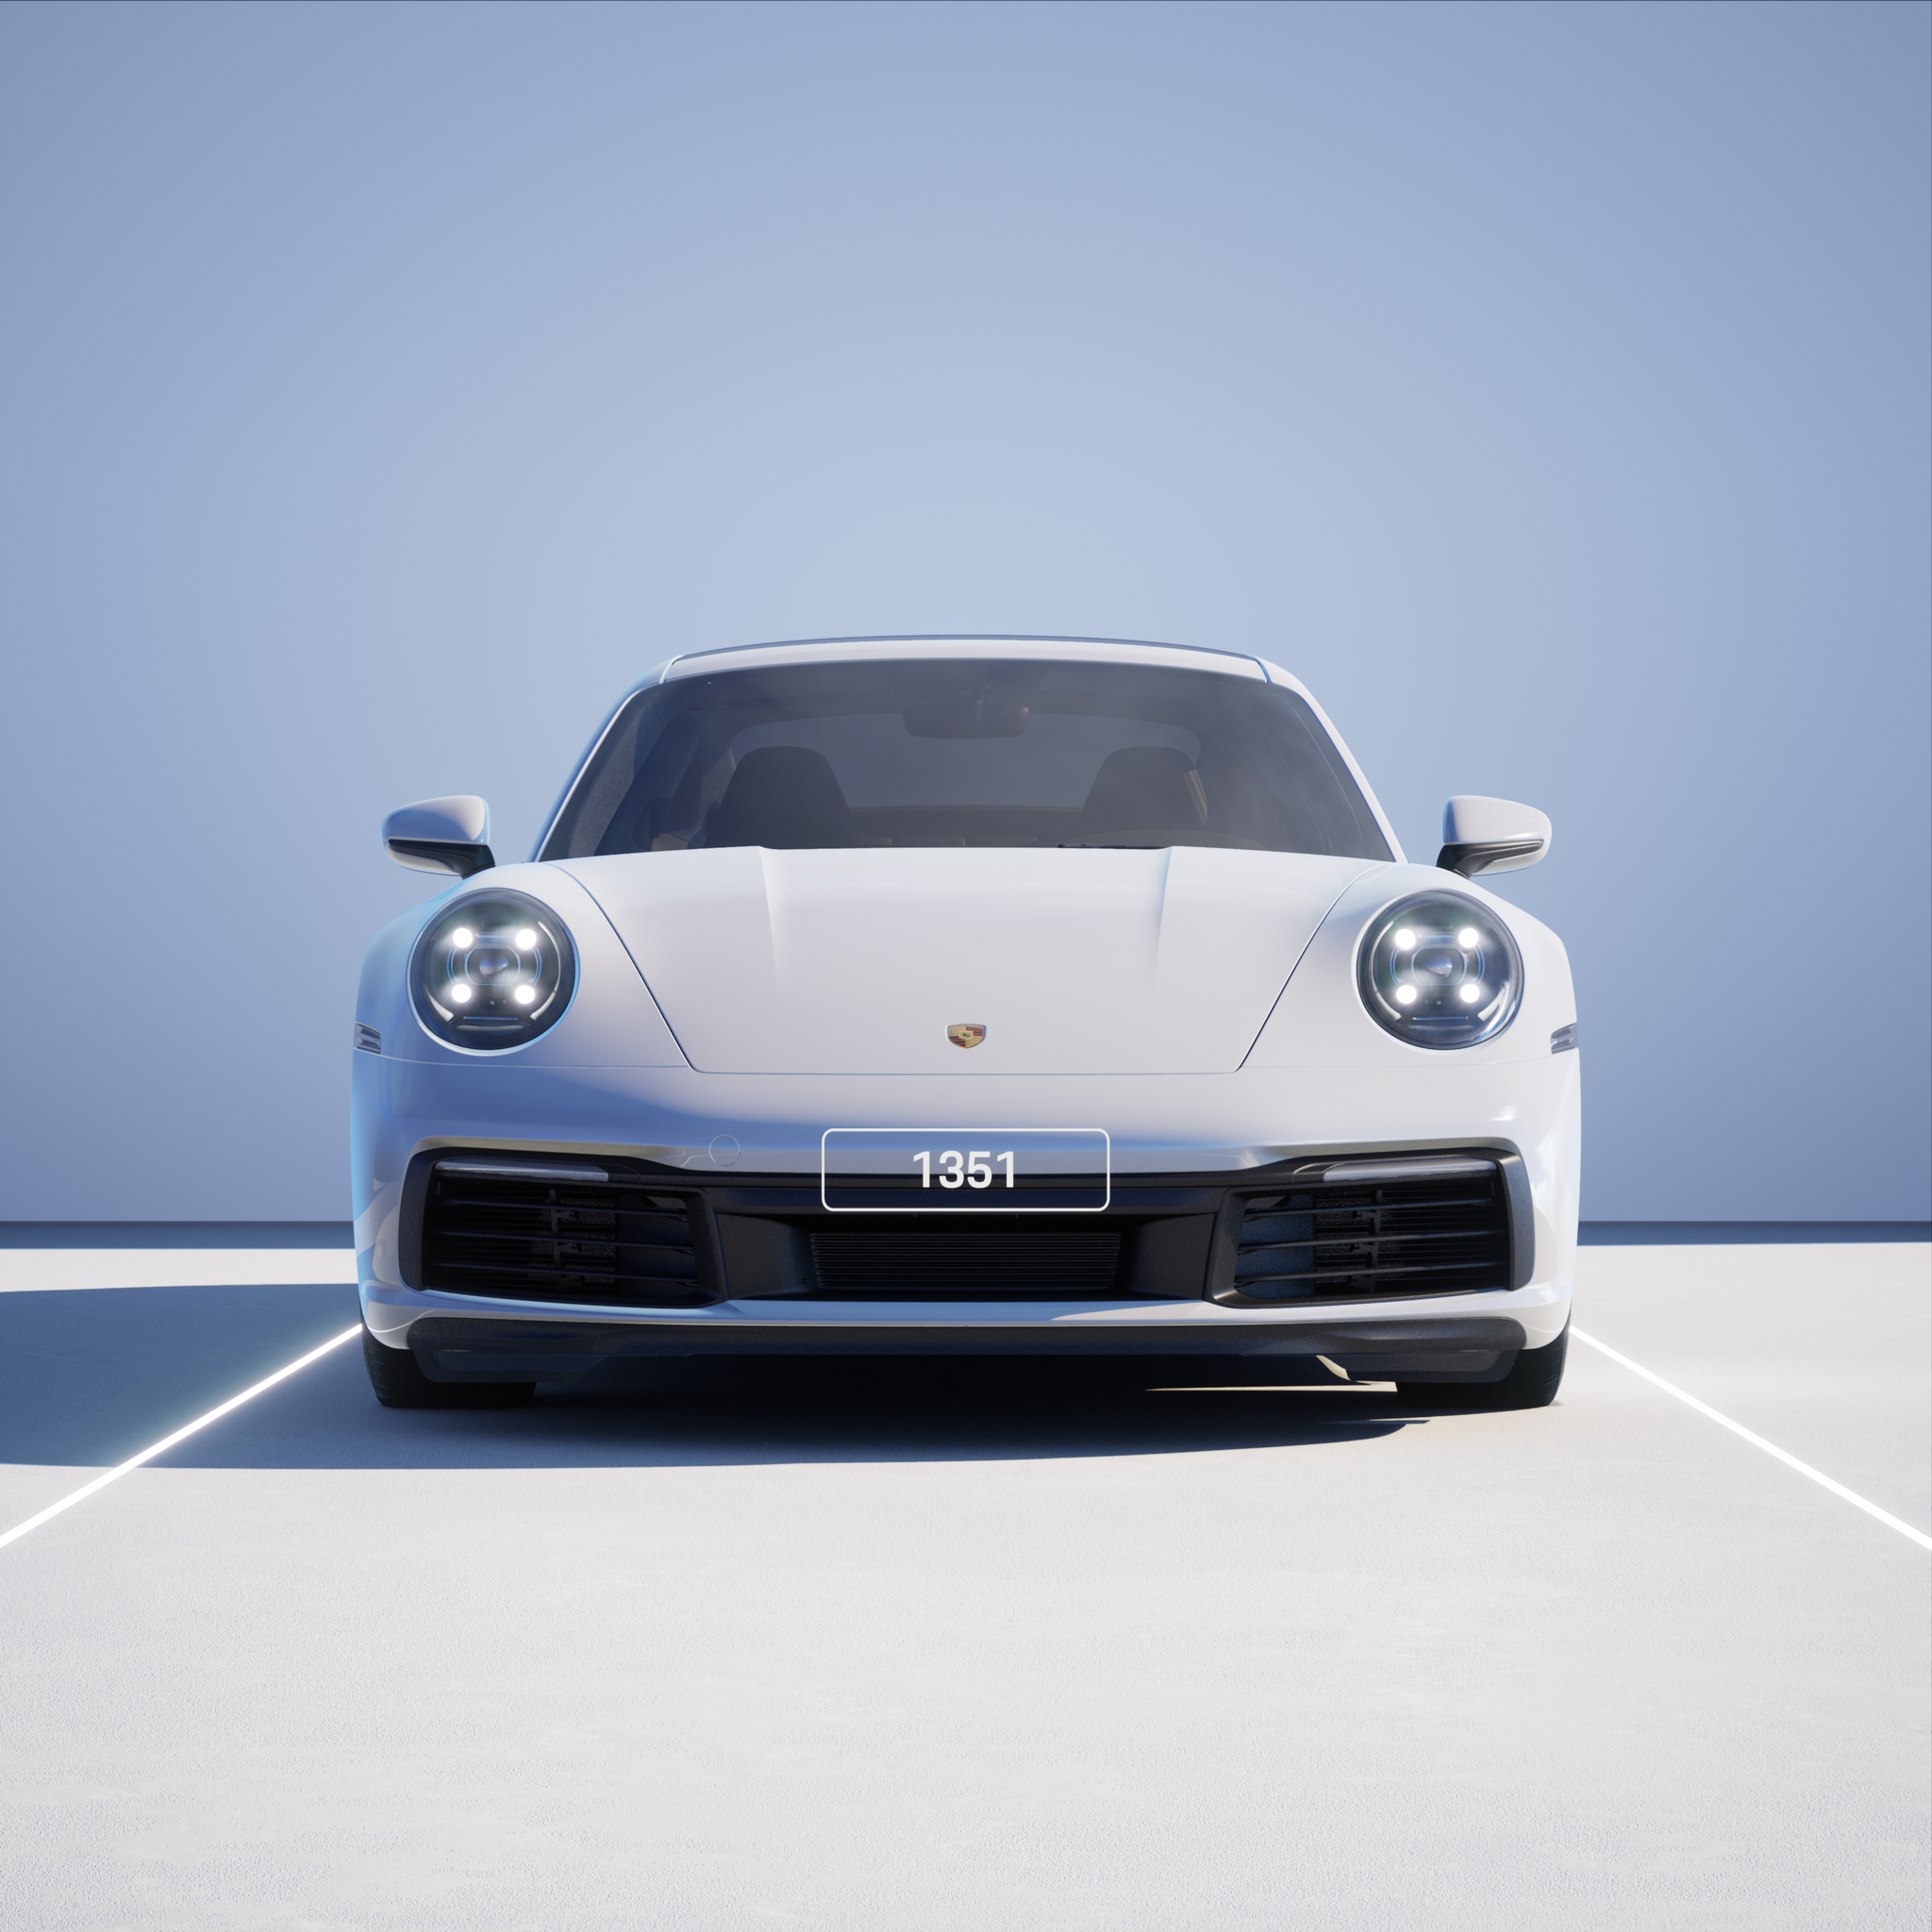 The PORSCHΞ 911 1351 image in phase